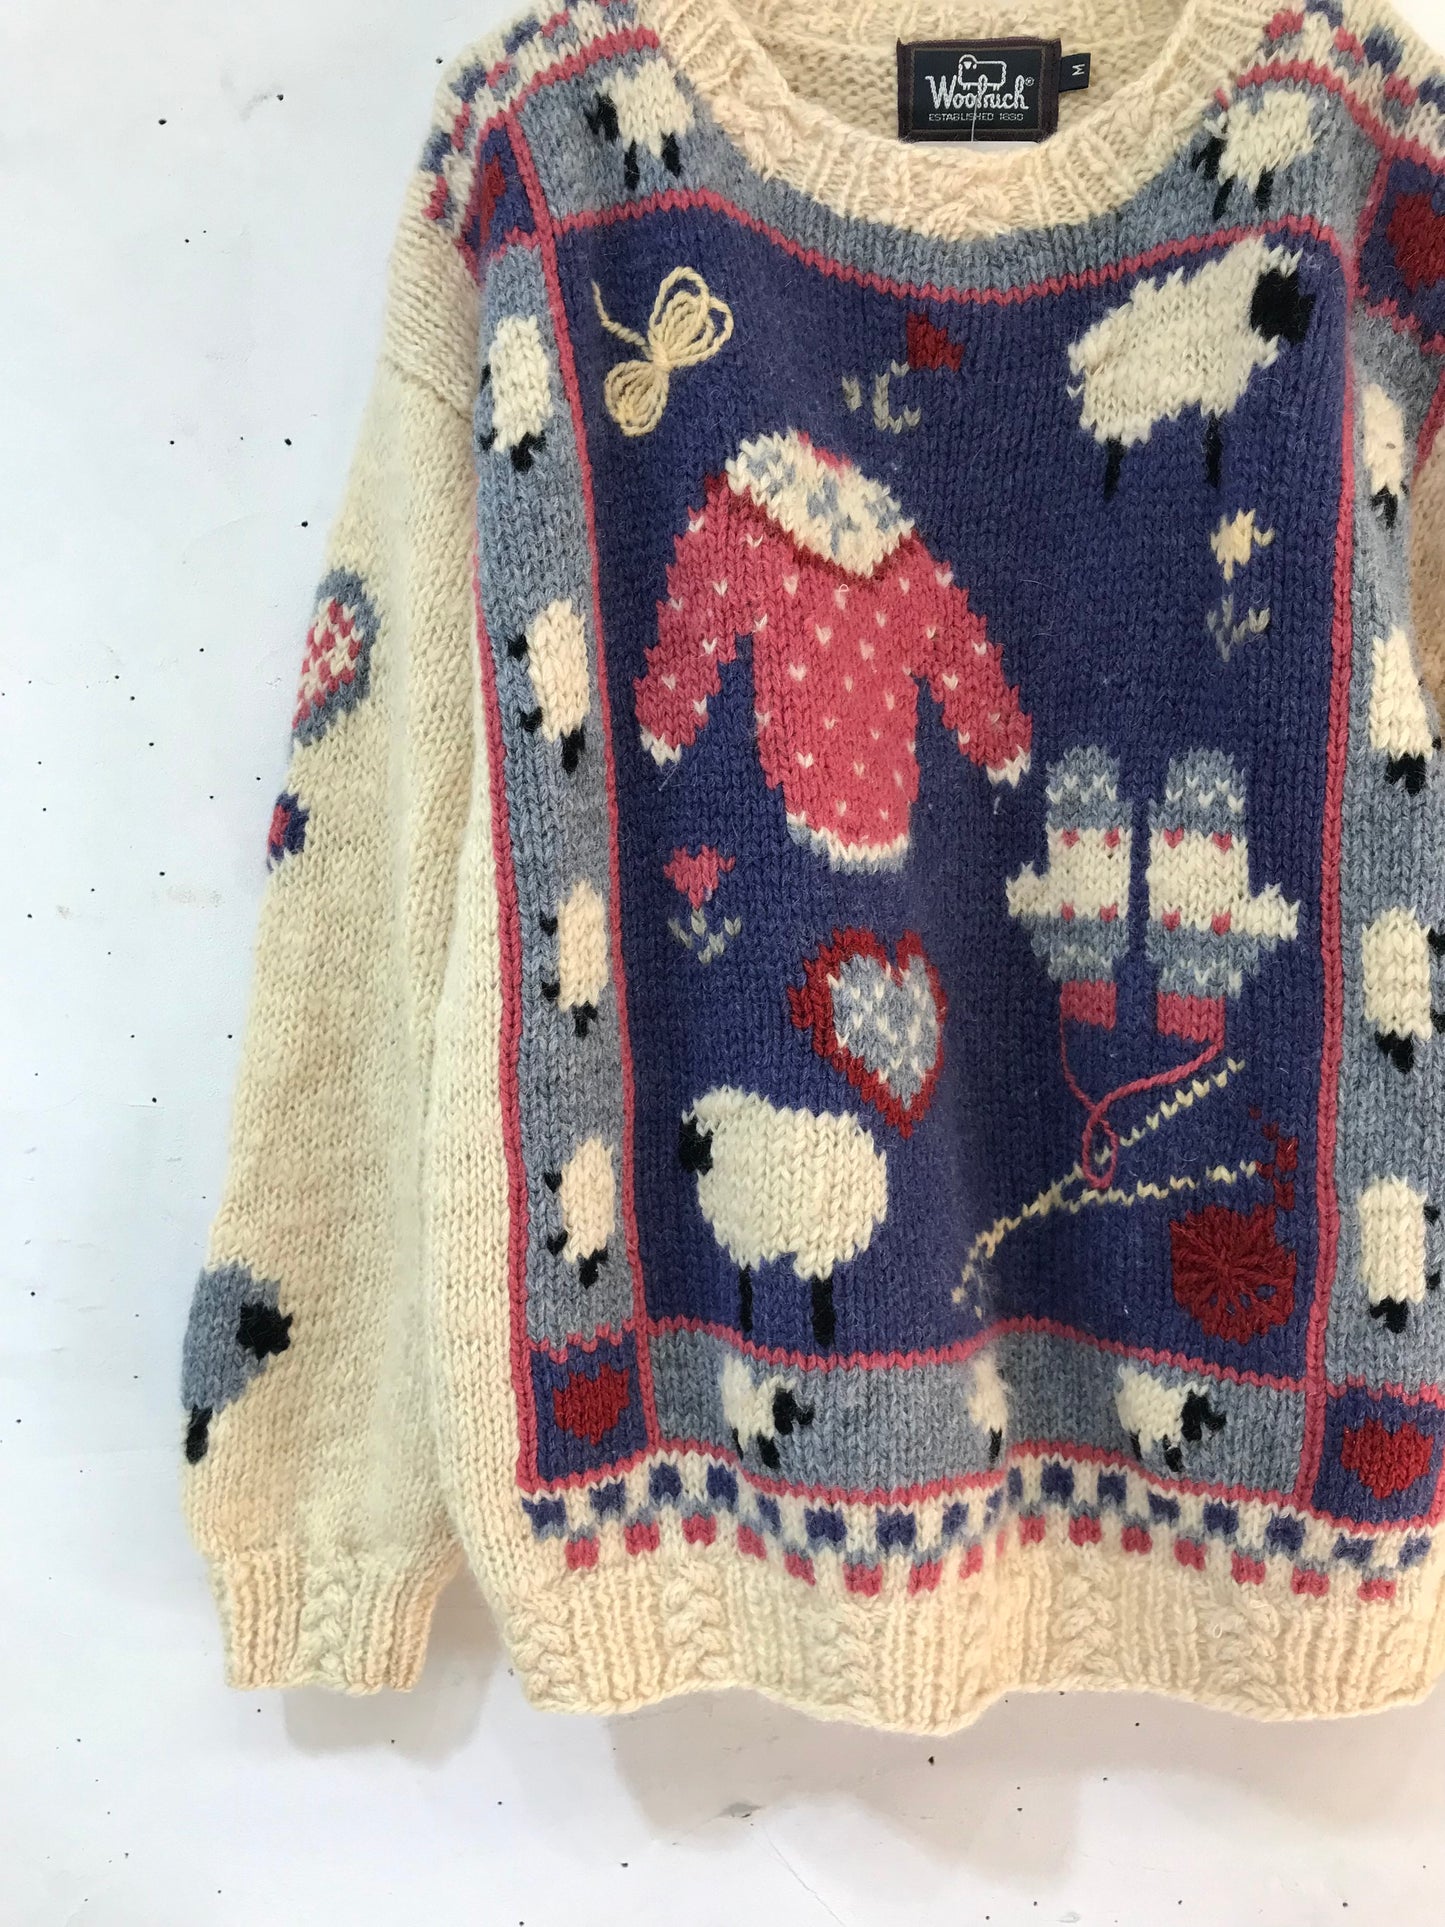 Vintage Hand Knit Sweater 〜Wool Rich〜 [I25080]